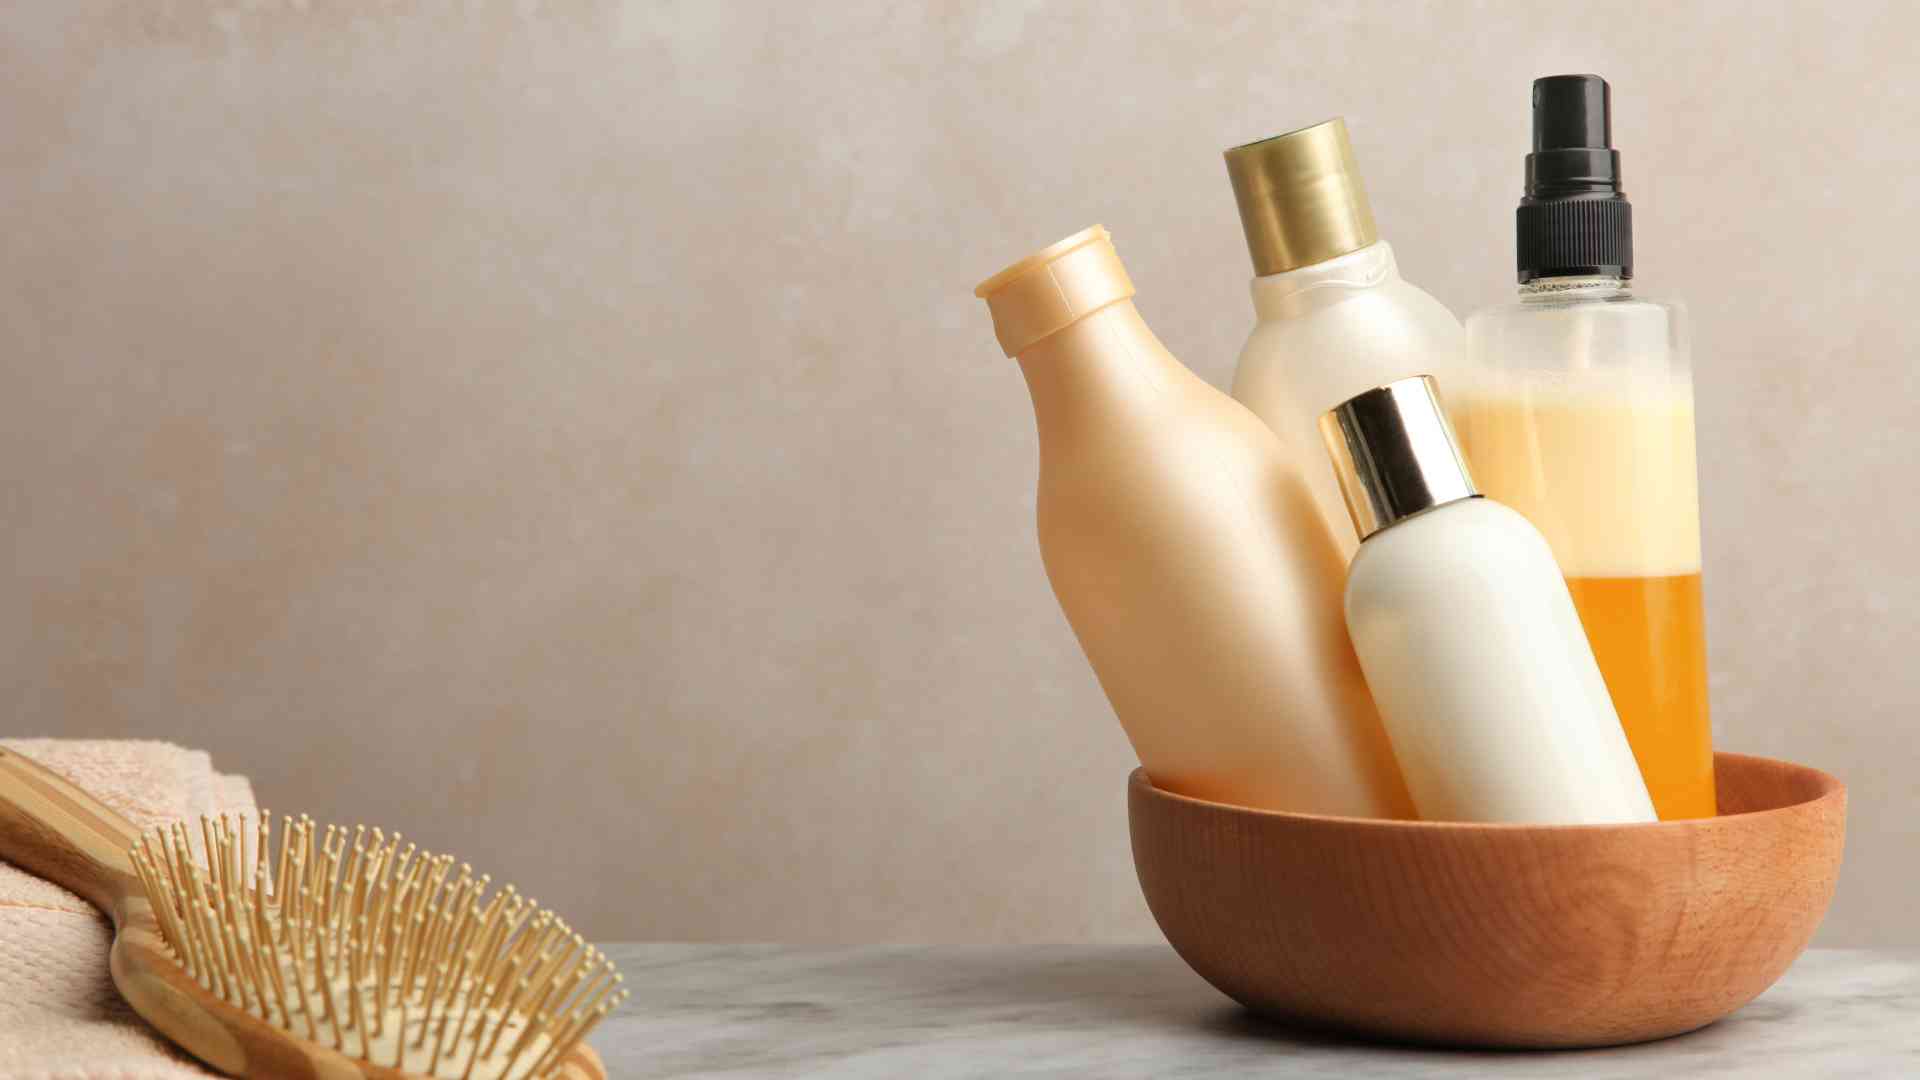 How do hair care products affect hair loss, and are there lesser-known alternatives